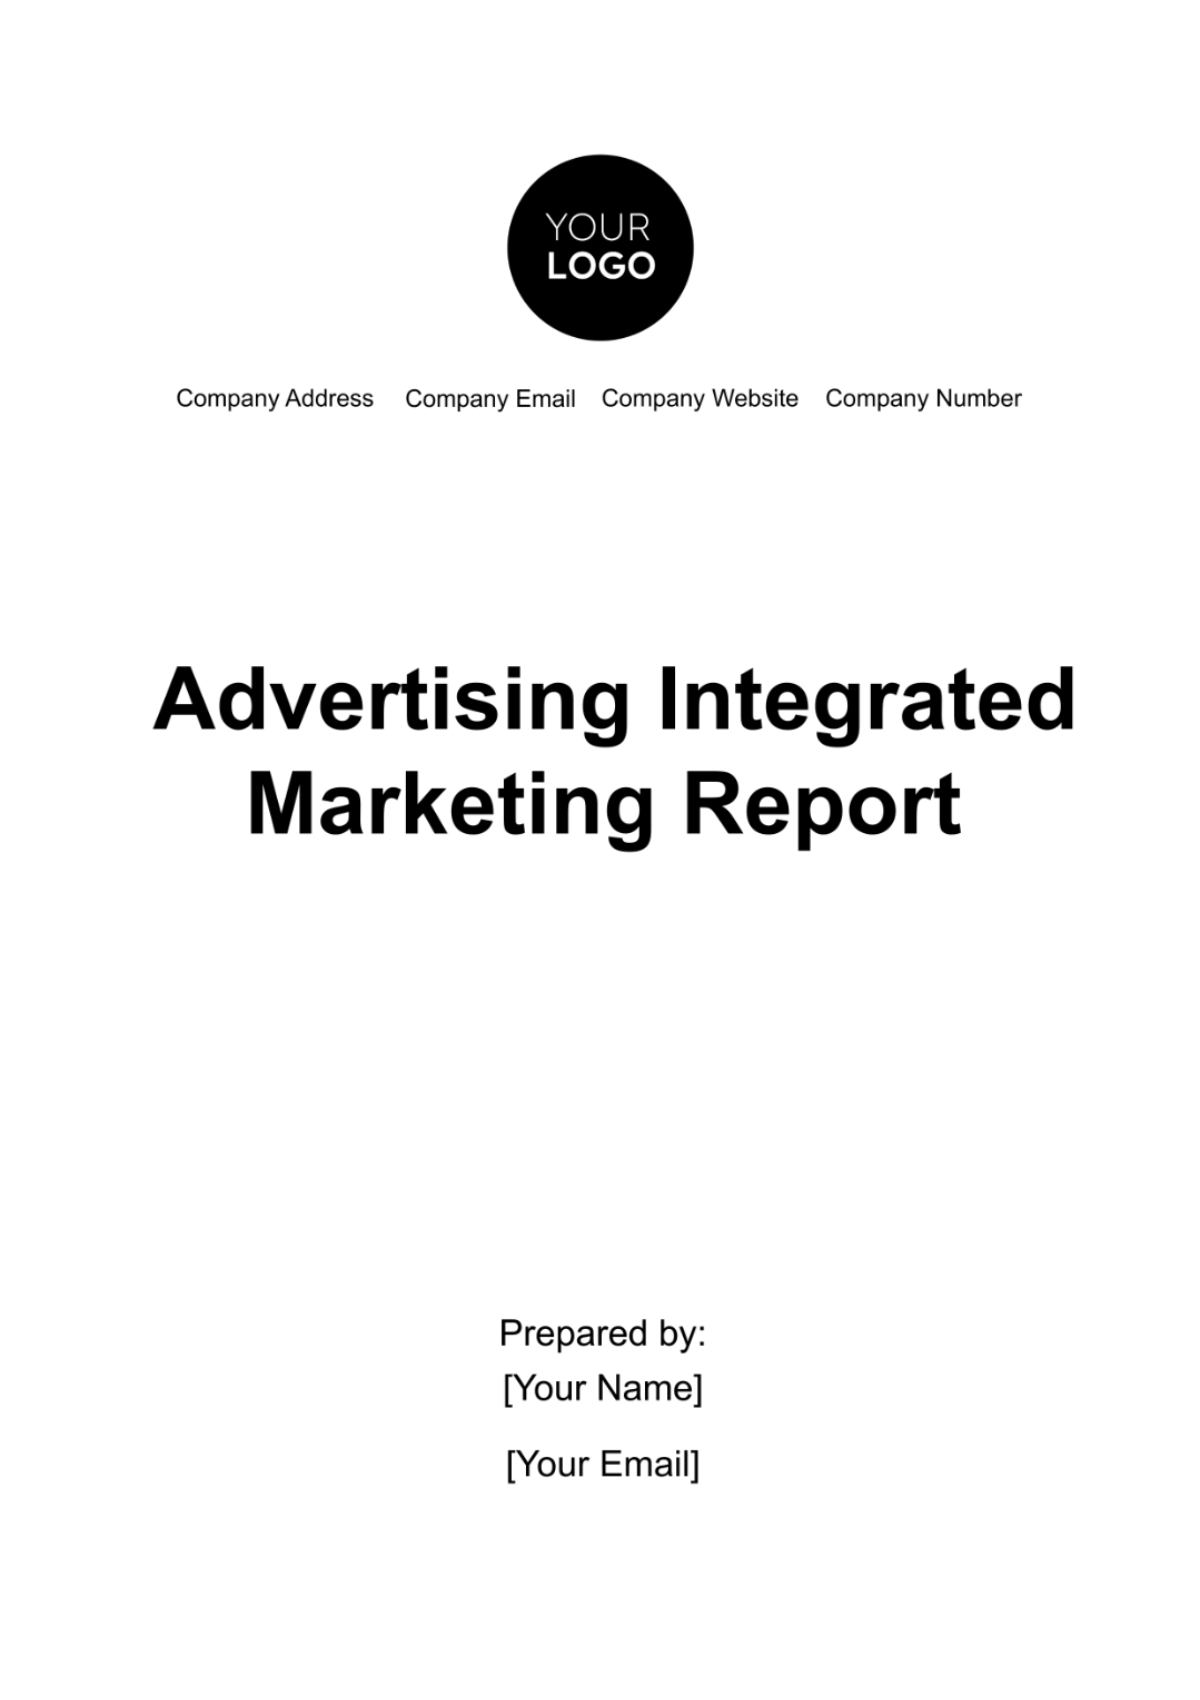 Free Advertising Integrated Marketing Report Template